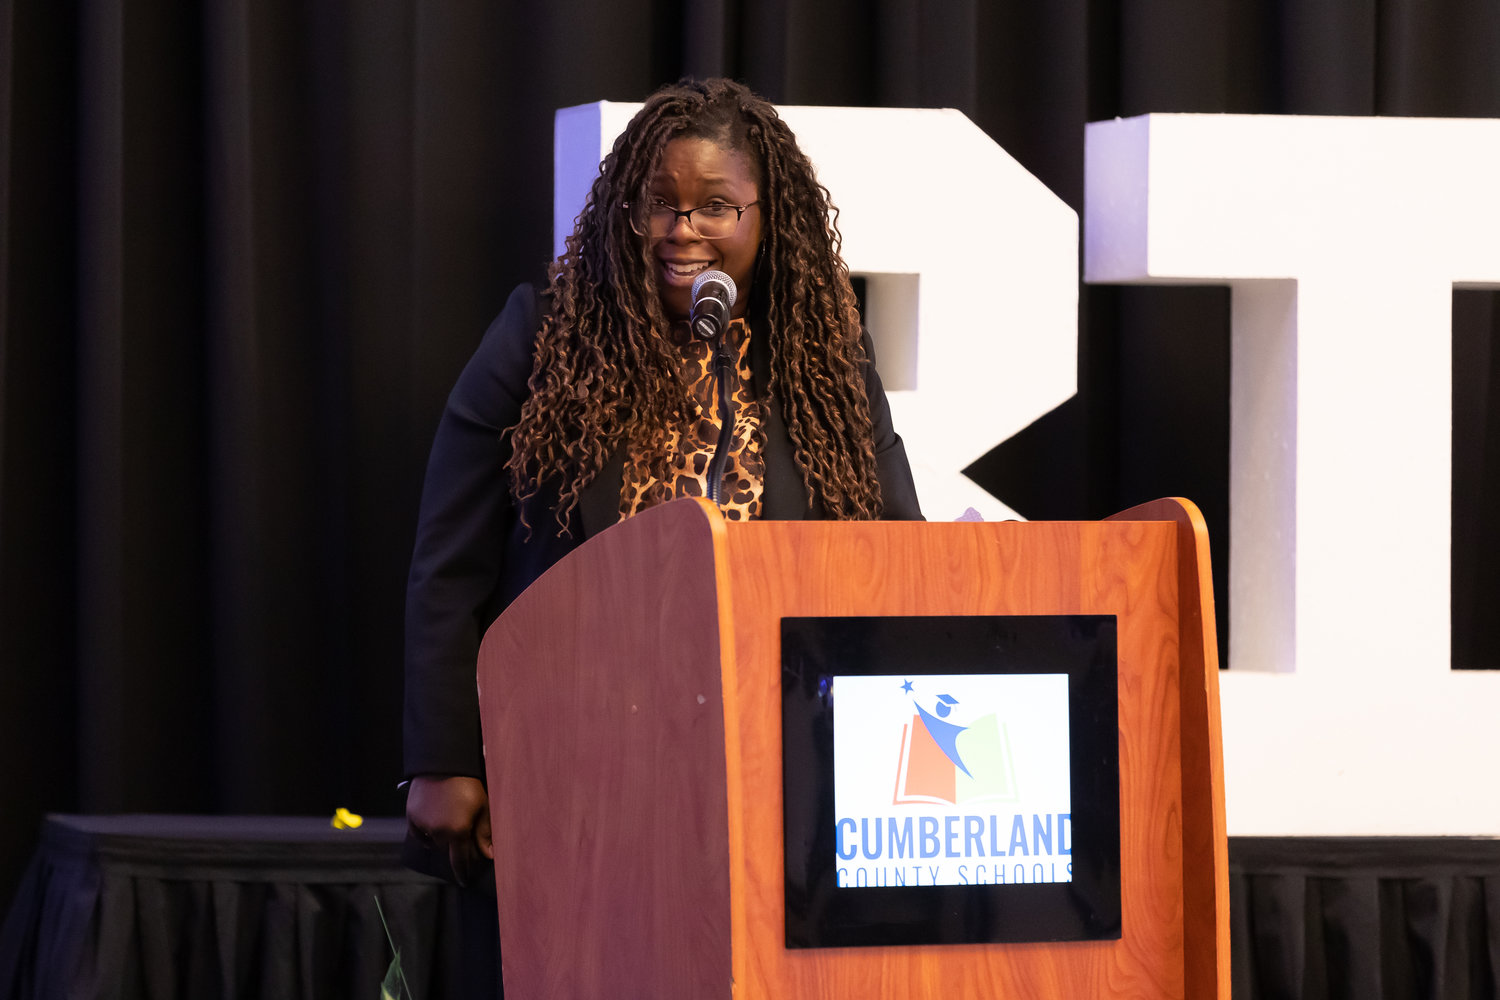 Talicia Smith, a science teacher at Douglas Byrd Middle School, addresses the audience after being named the Cumberland County Schools 2023 Teacher of the Year during a program Monday night at the Embassy Suites Fayetteville-Fort Bragg.